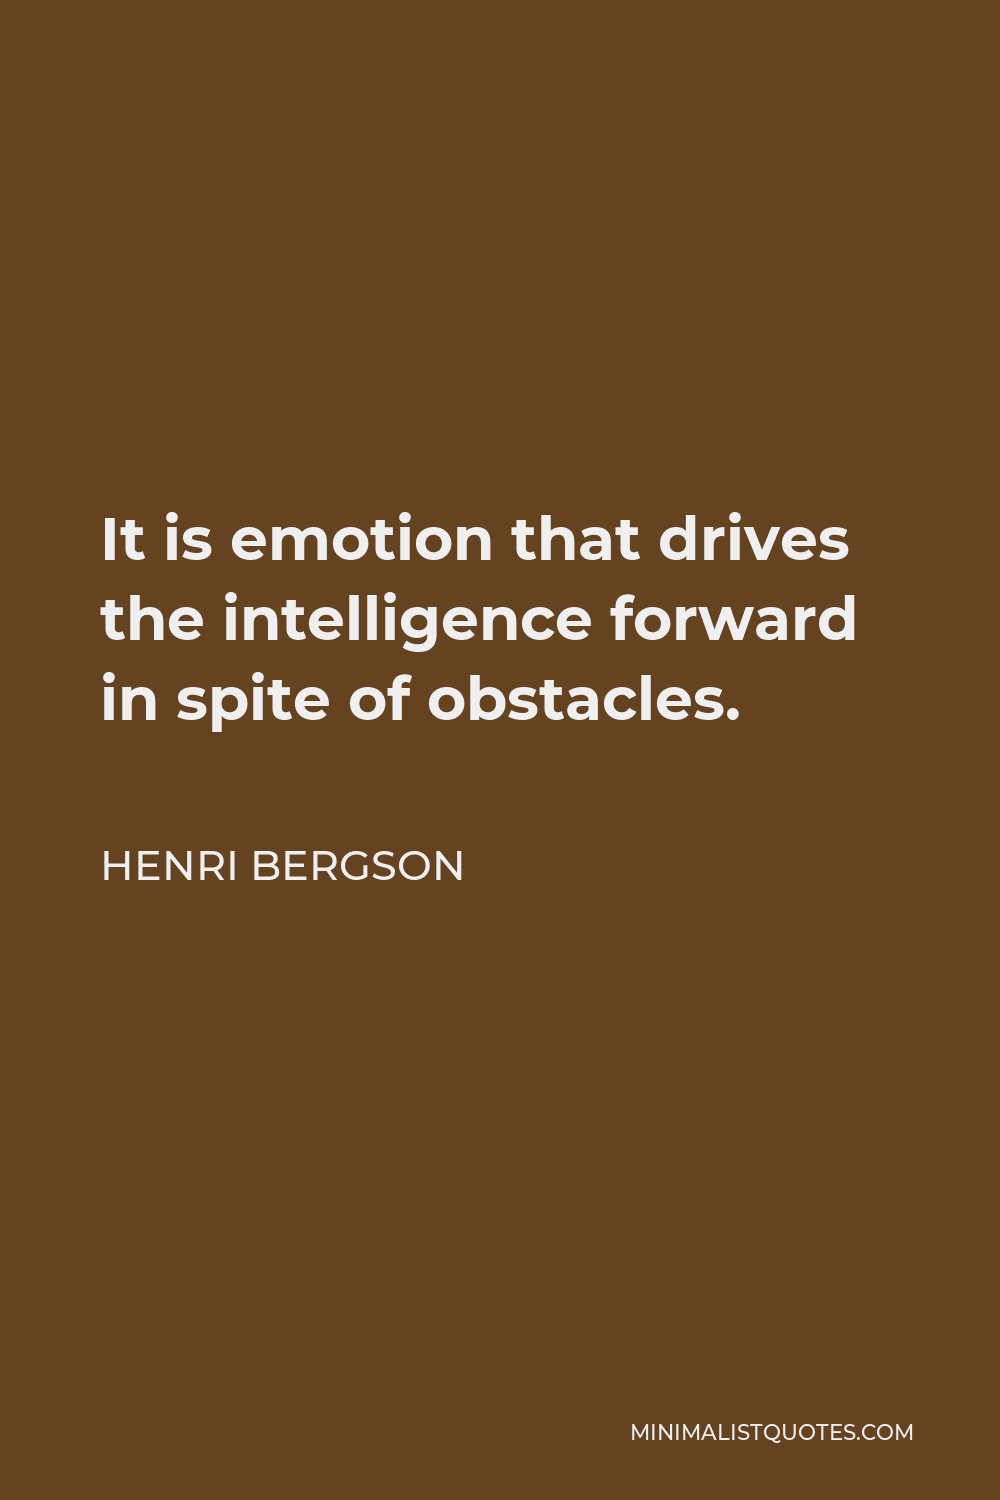 Henri Bergson Quote - It is emotion that drives the intelligence forward in spite of obstacles.